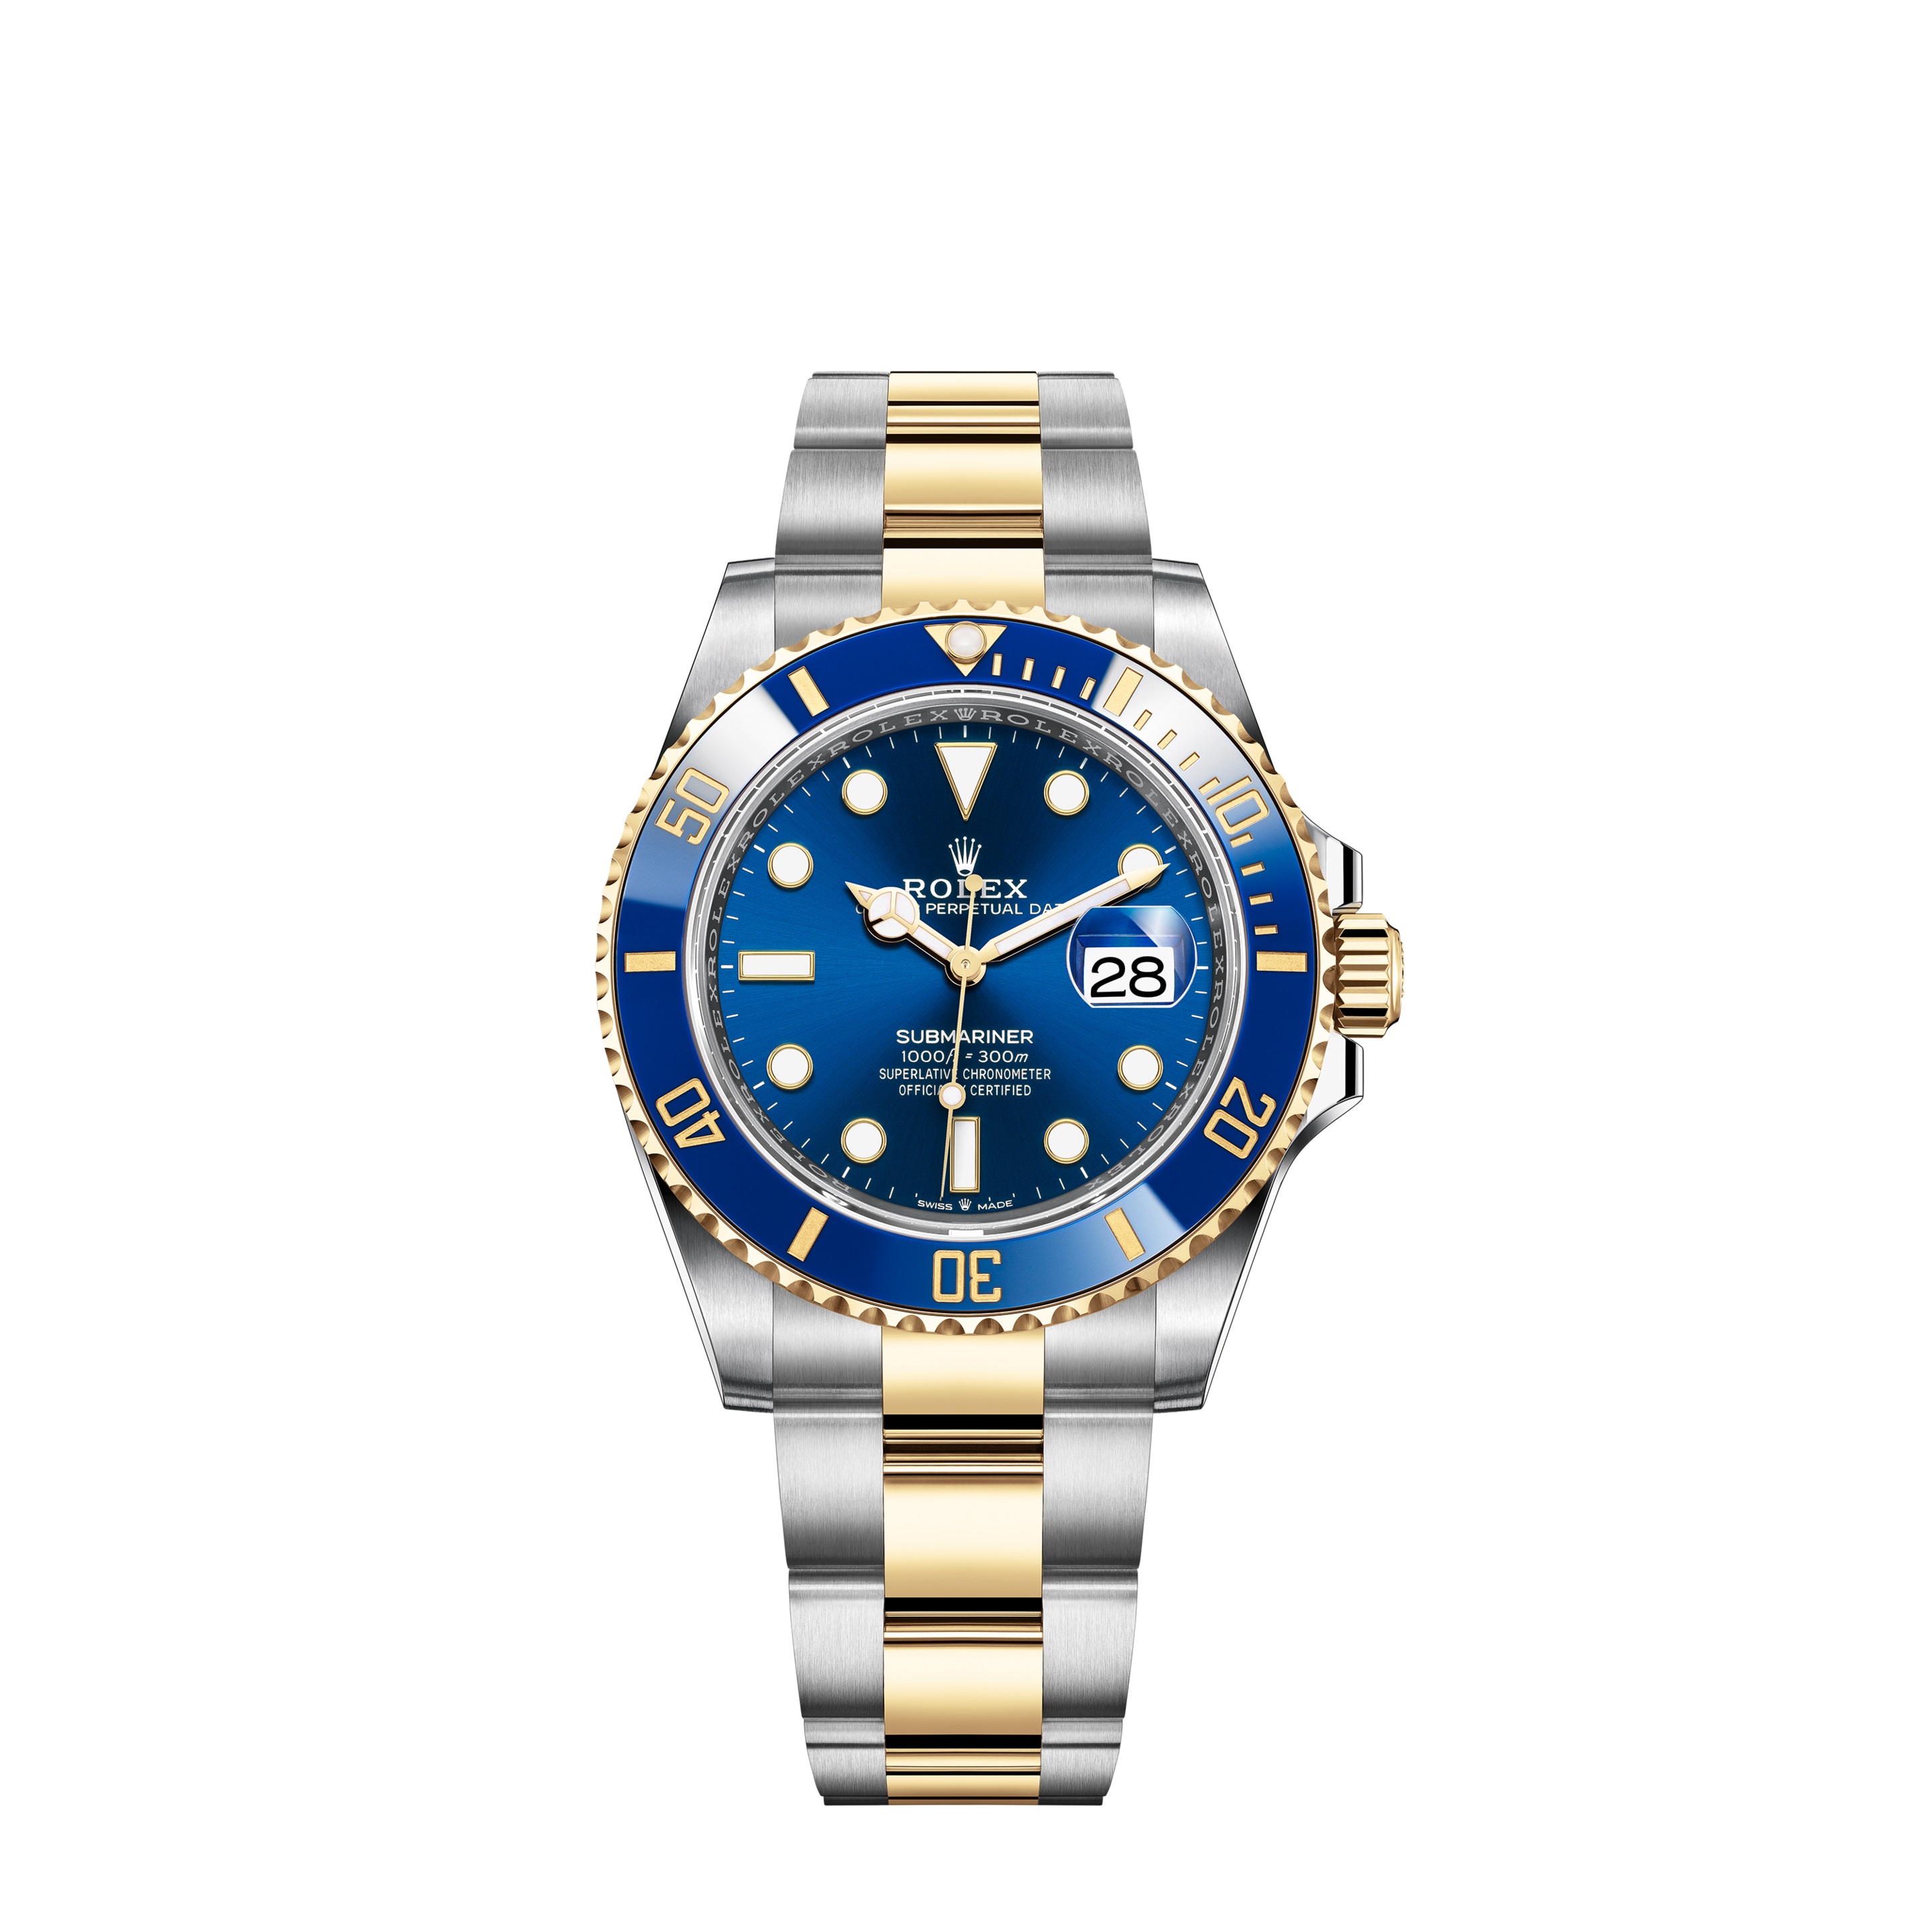 Submariner Date 126613LB Gold & Stainless Steel Watch (Royal Blue)